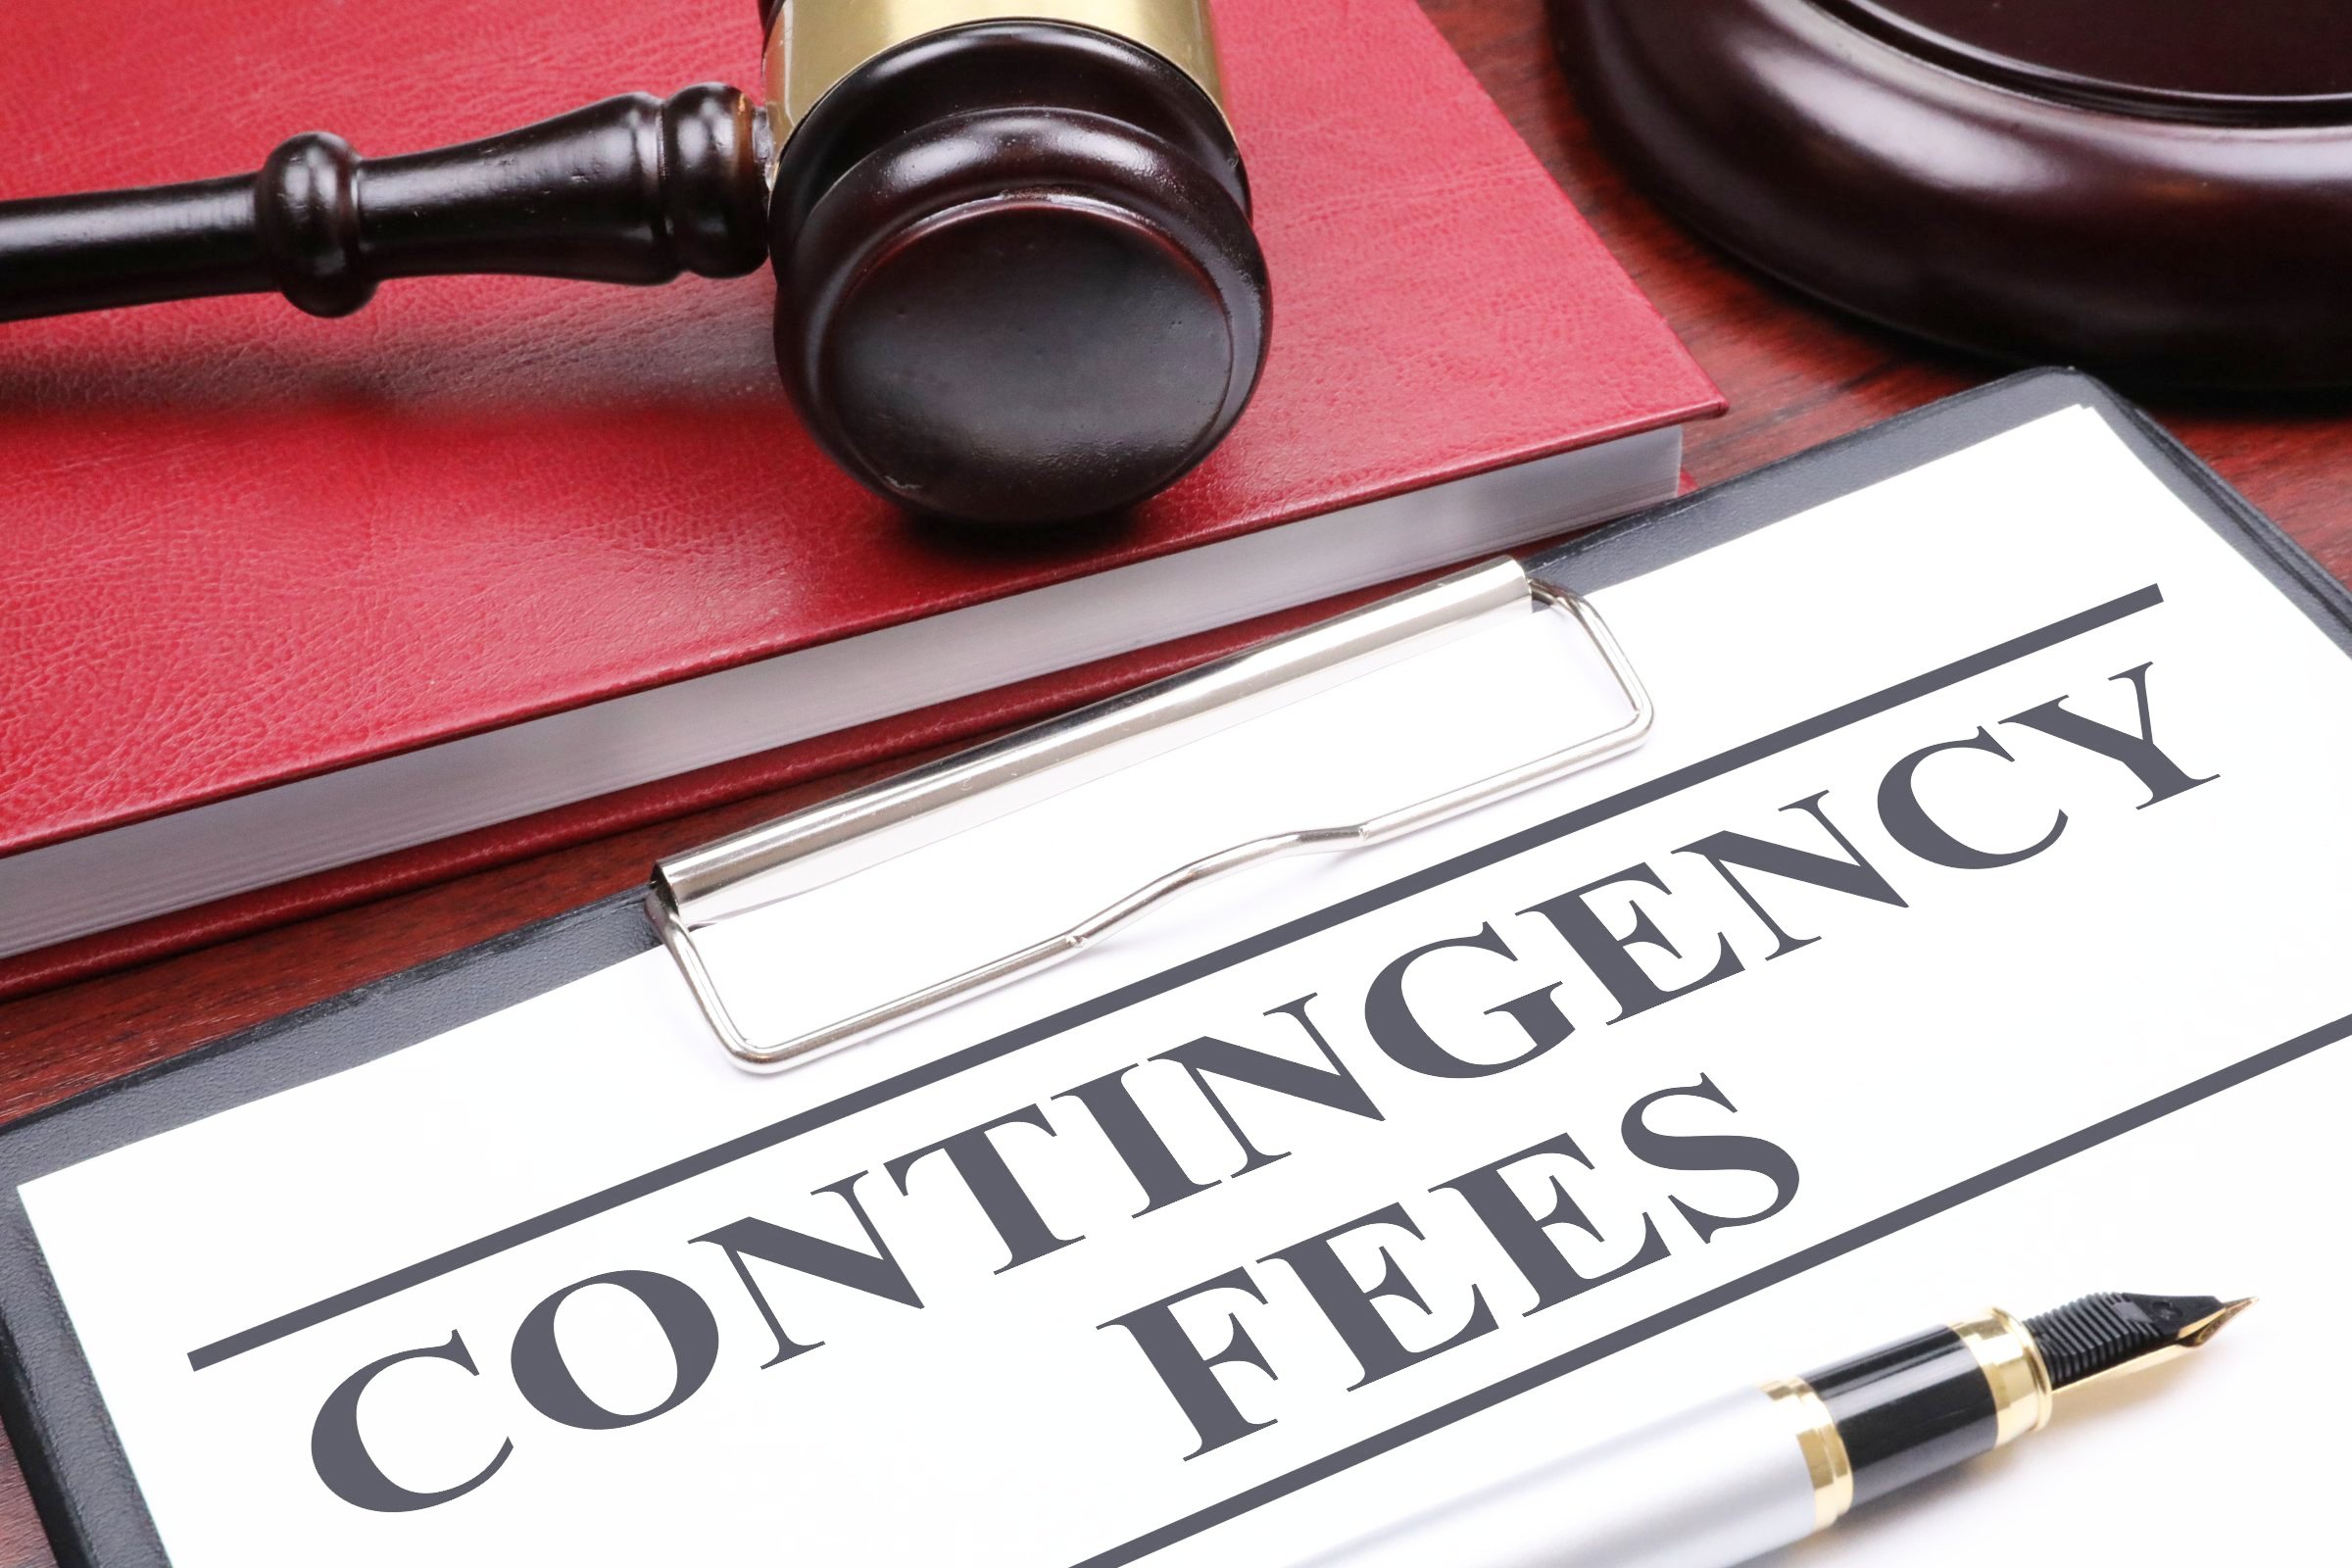 contingency fees